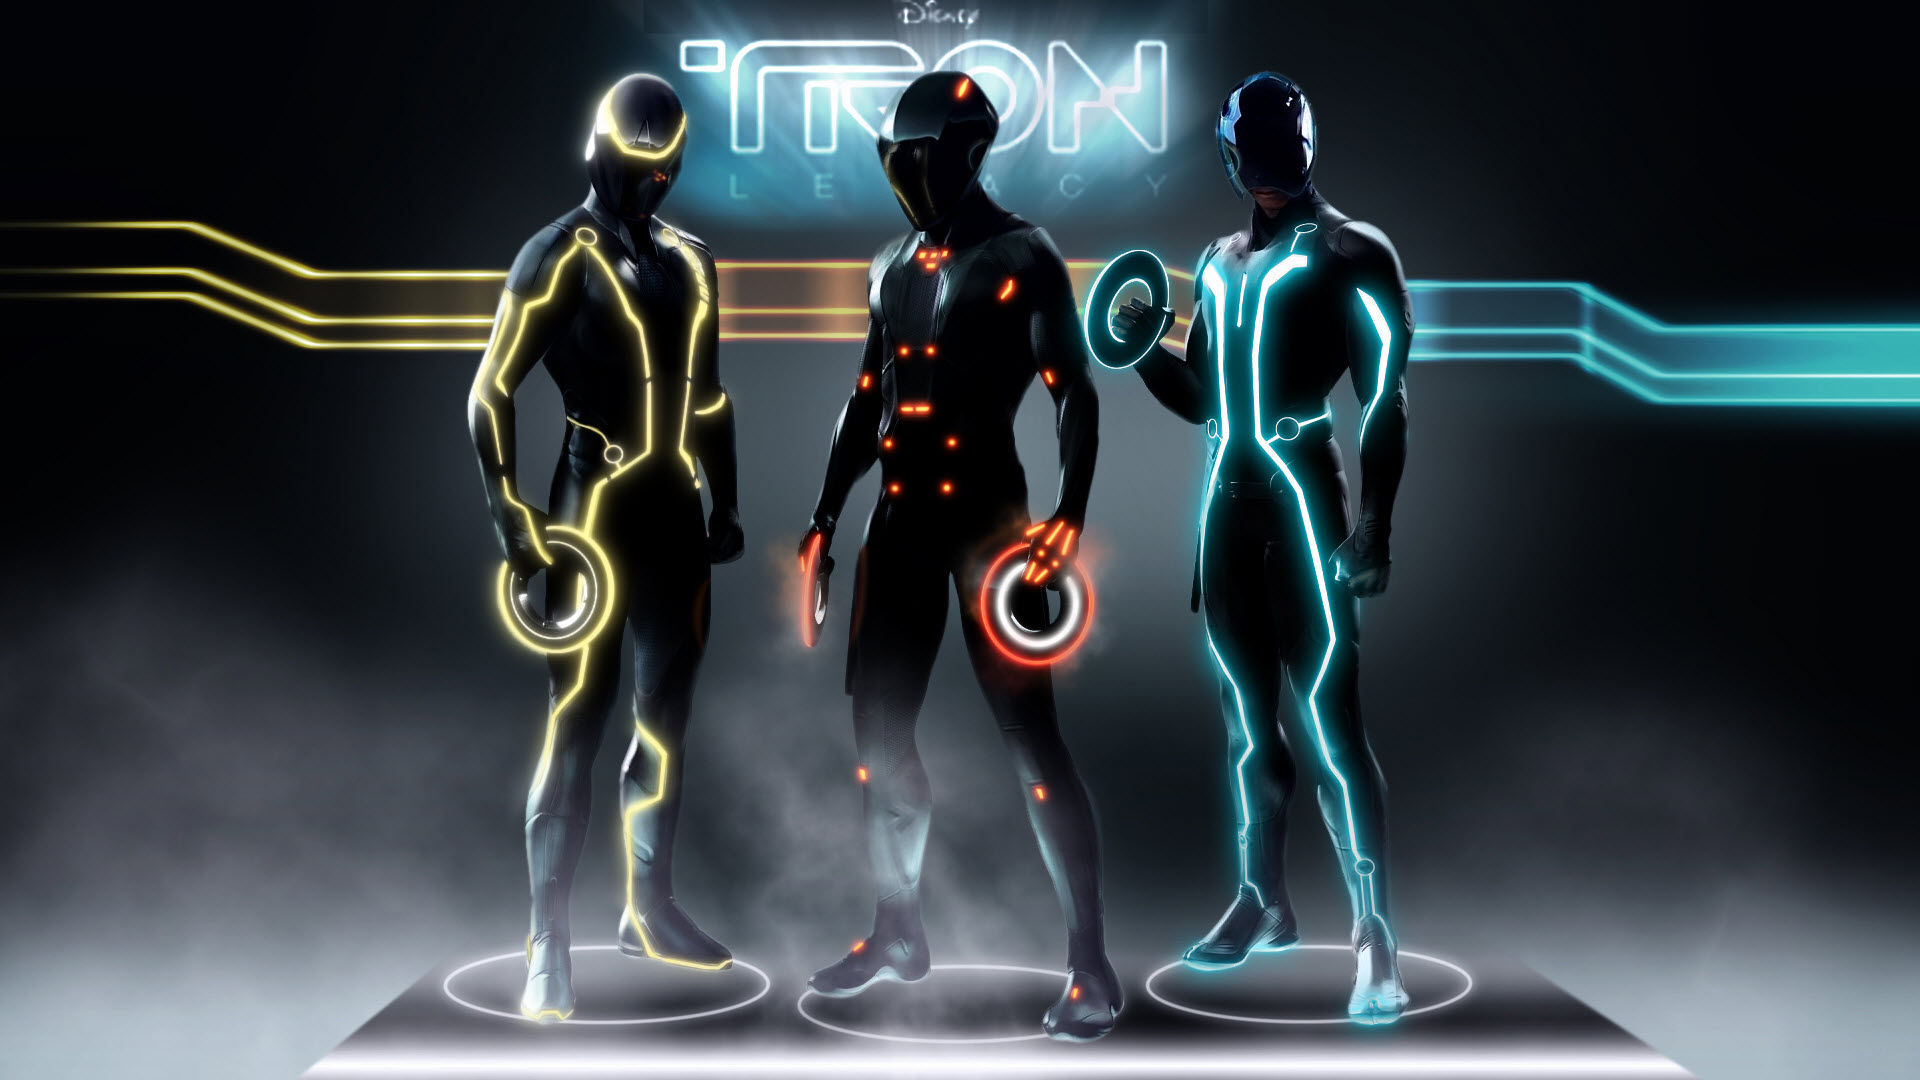 Wallpapers Monster Energy Tron Hd Light Cycle 1920x1080 | #220610 ...